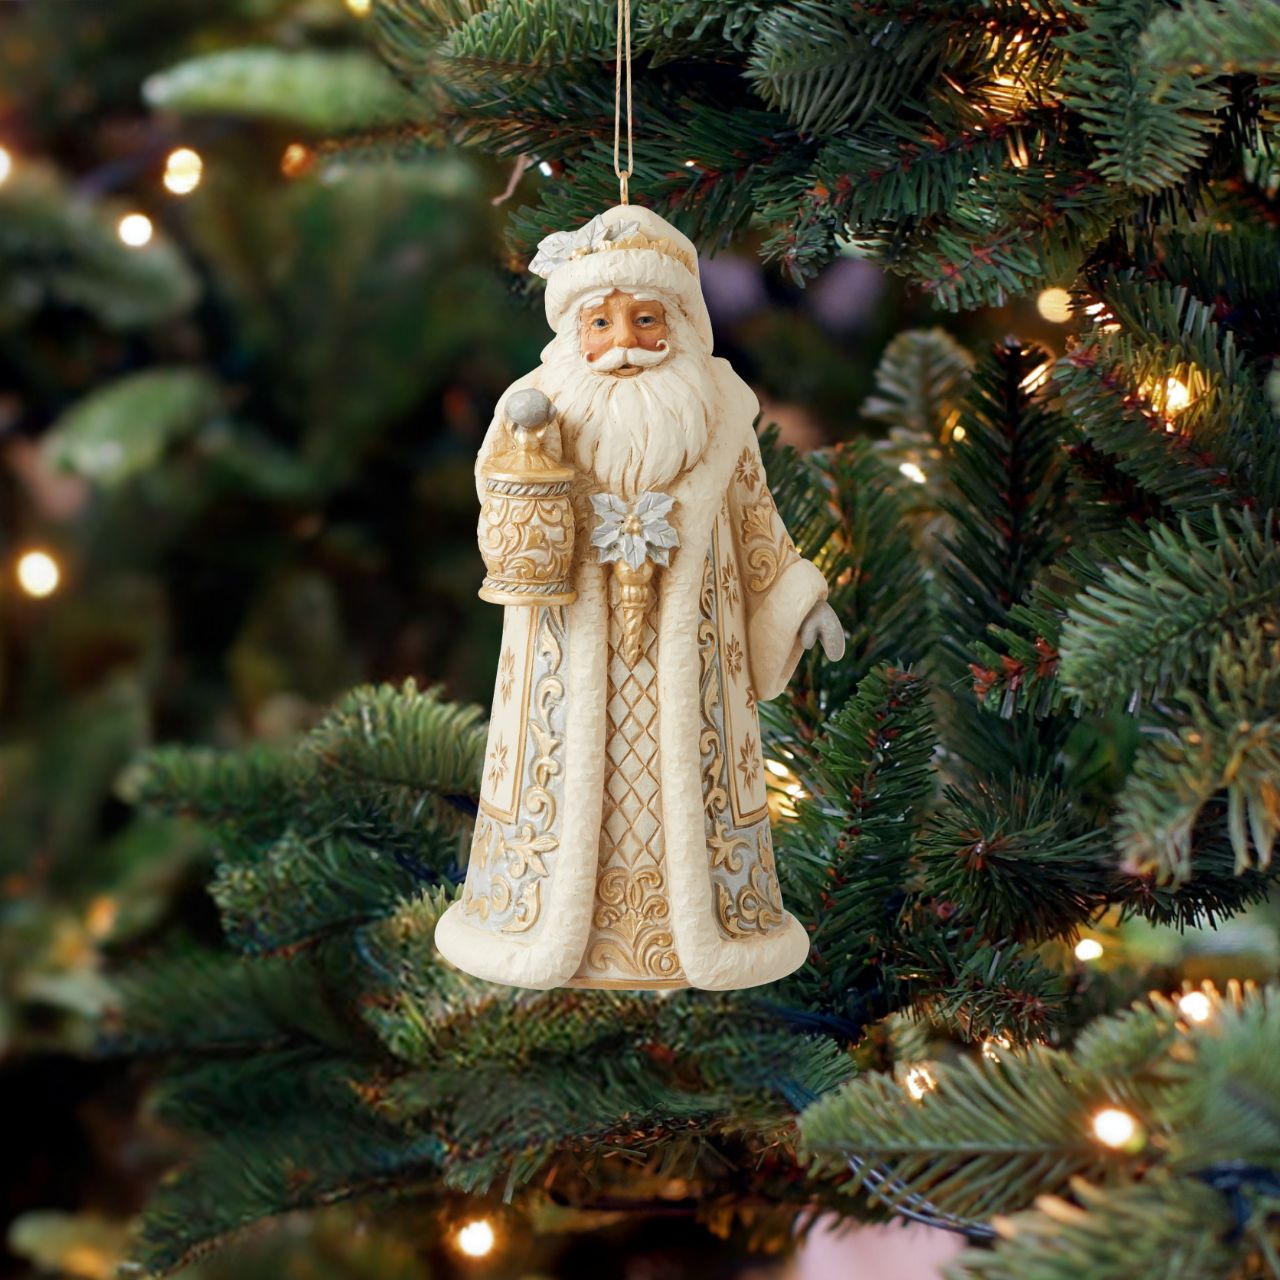 Holiday Lustre Santa Hanging Ornament  Santa sparkles in this holiday ornament by Jim Shore. Holding a lantern and cloaked in a striking suit fitted with metallic accents, Santa shines this season. With a smile and glittering poinsettias, Father Christmas radiates joy.